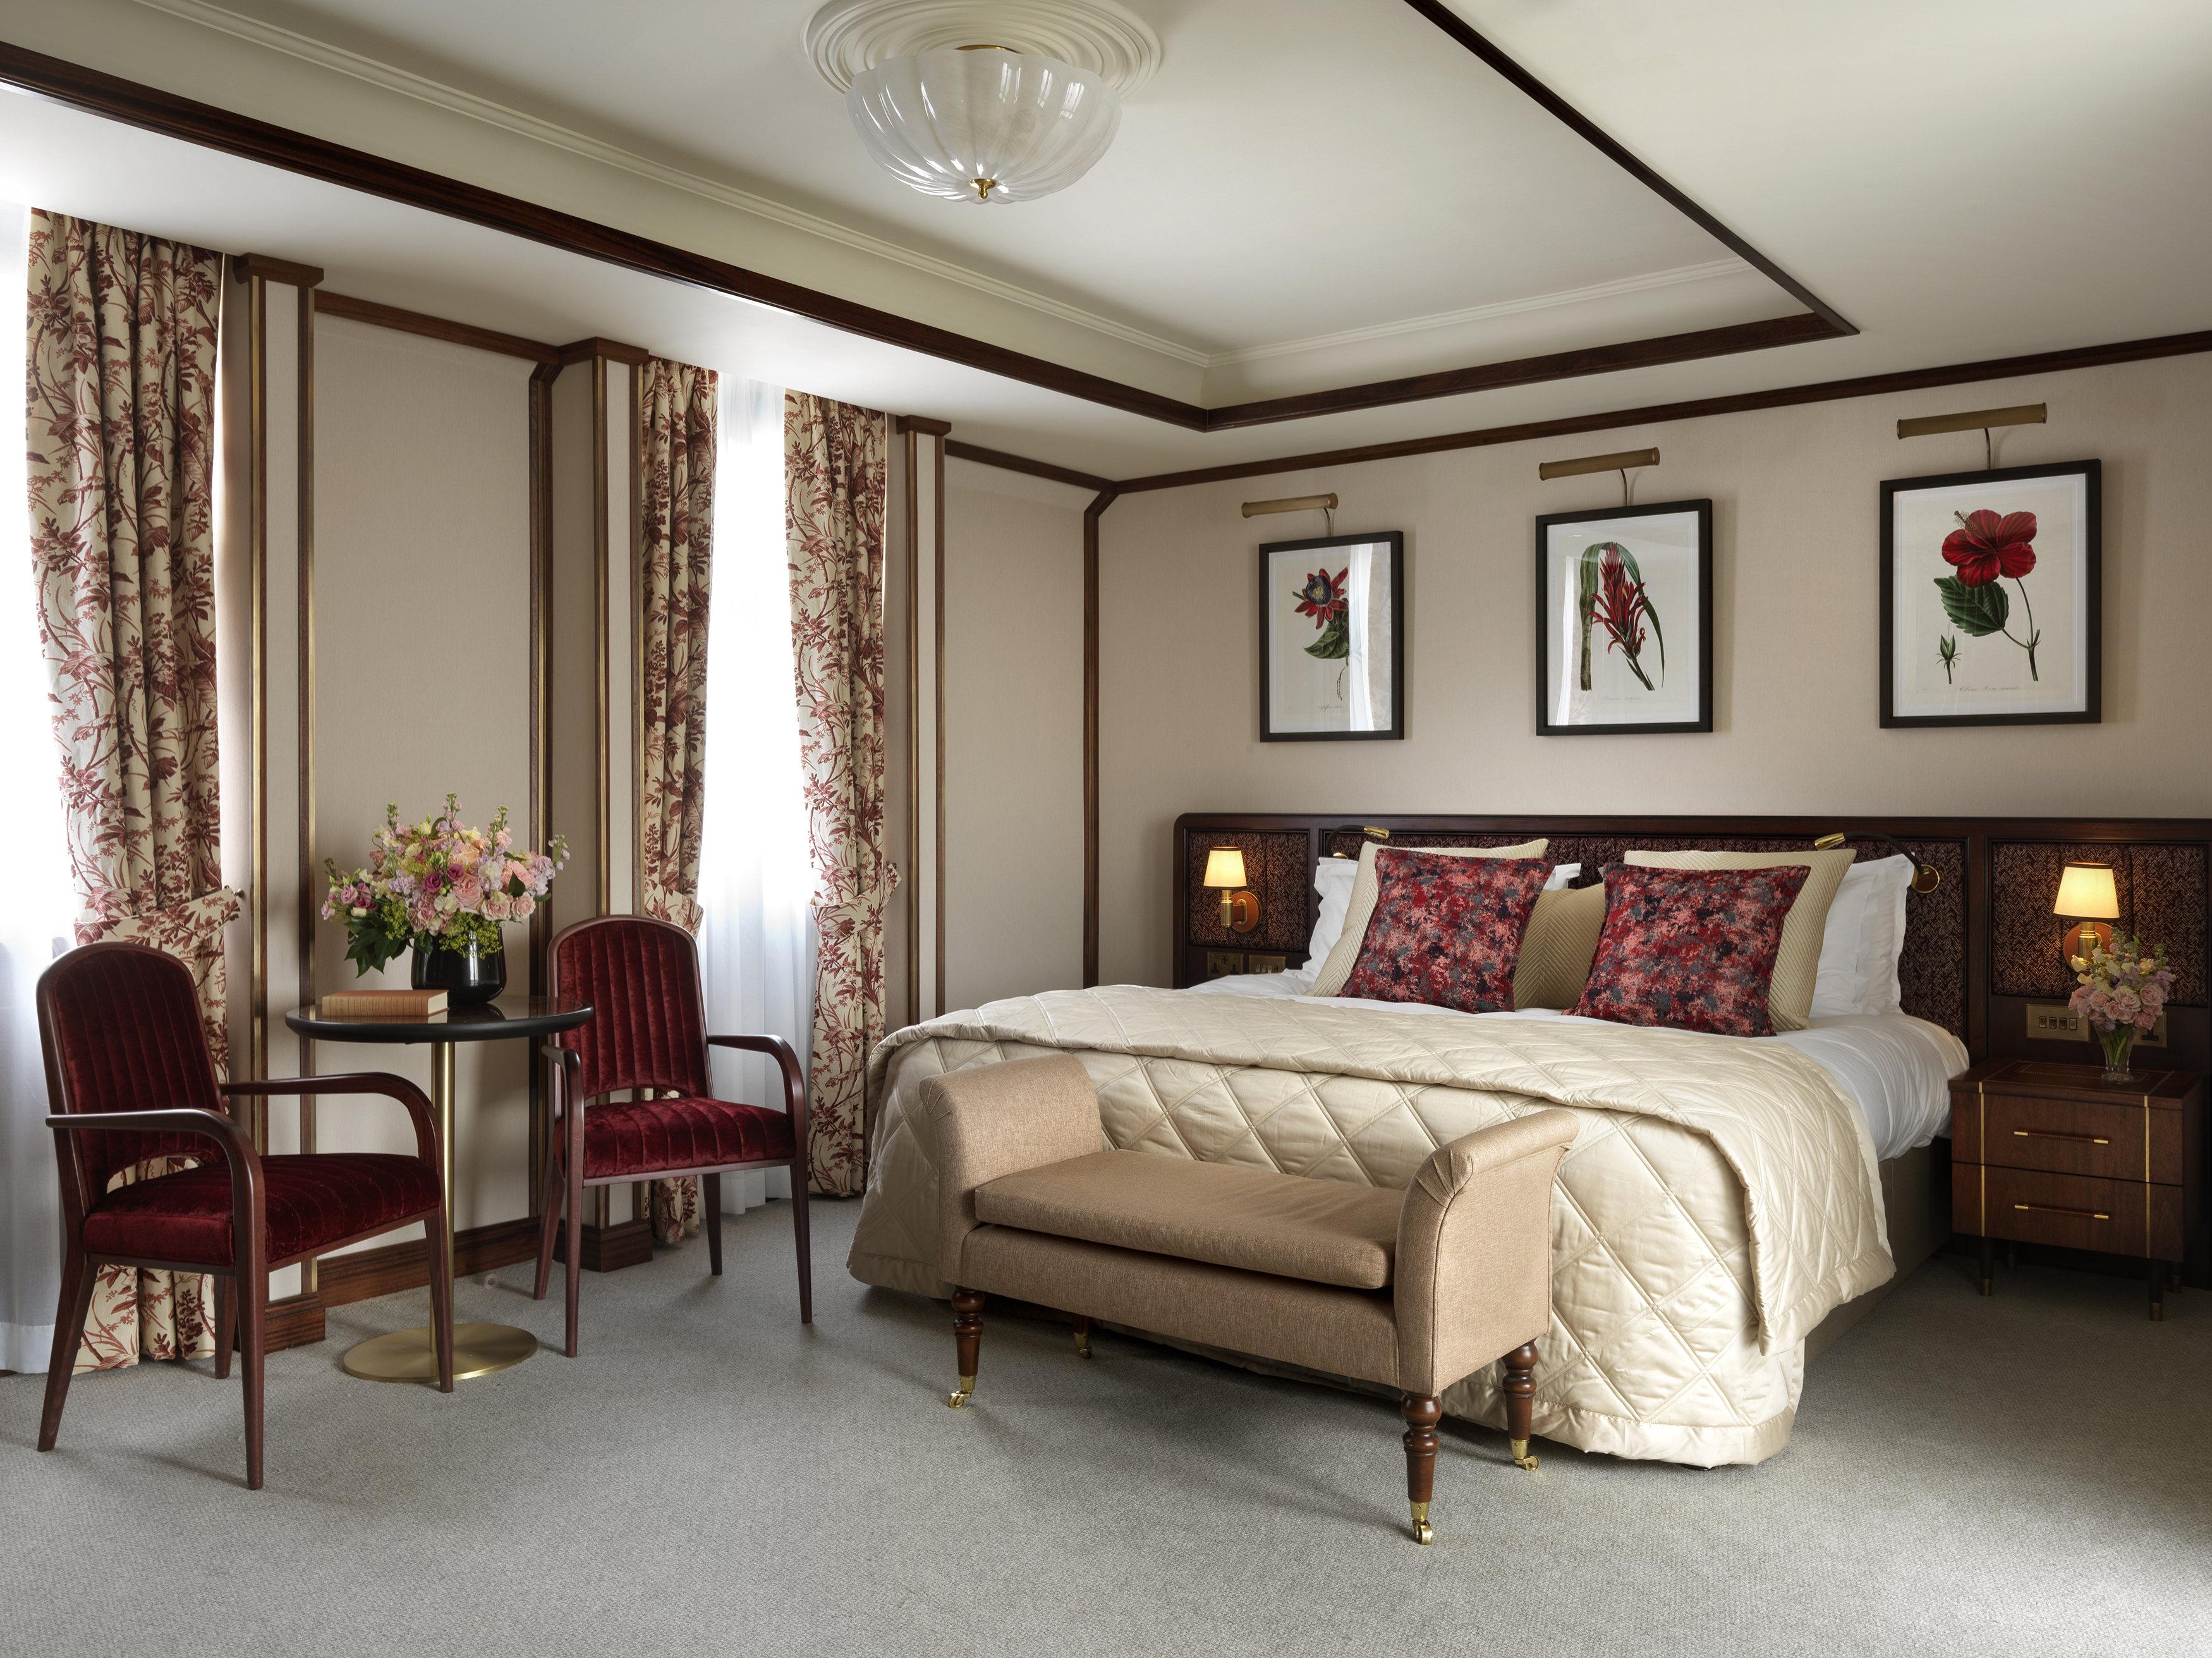 Win a Stay at The Stafford London - Junior Suite